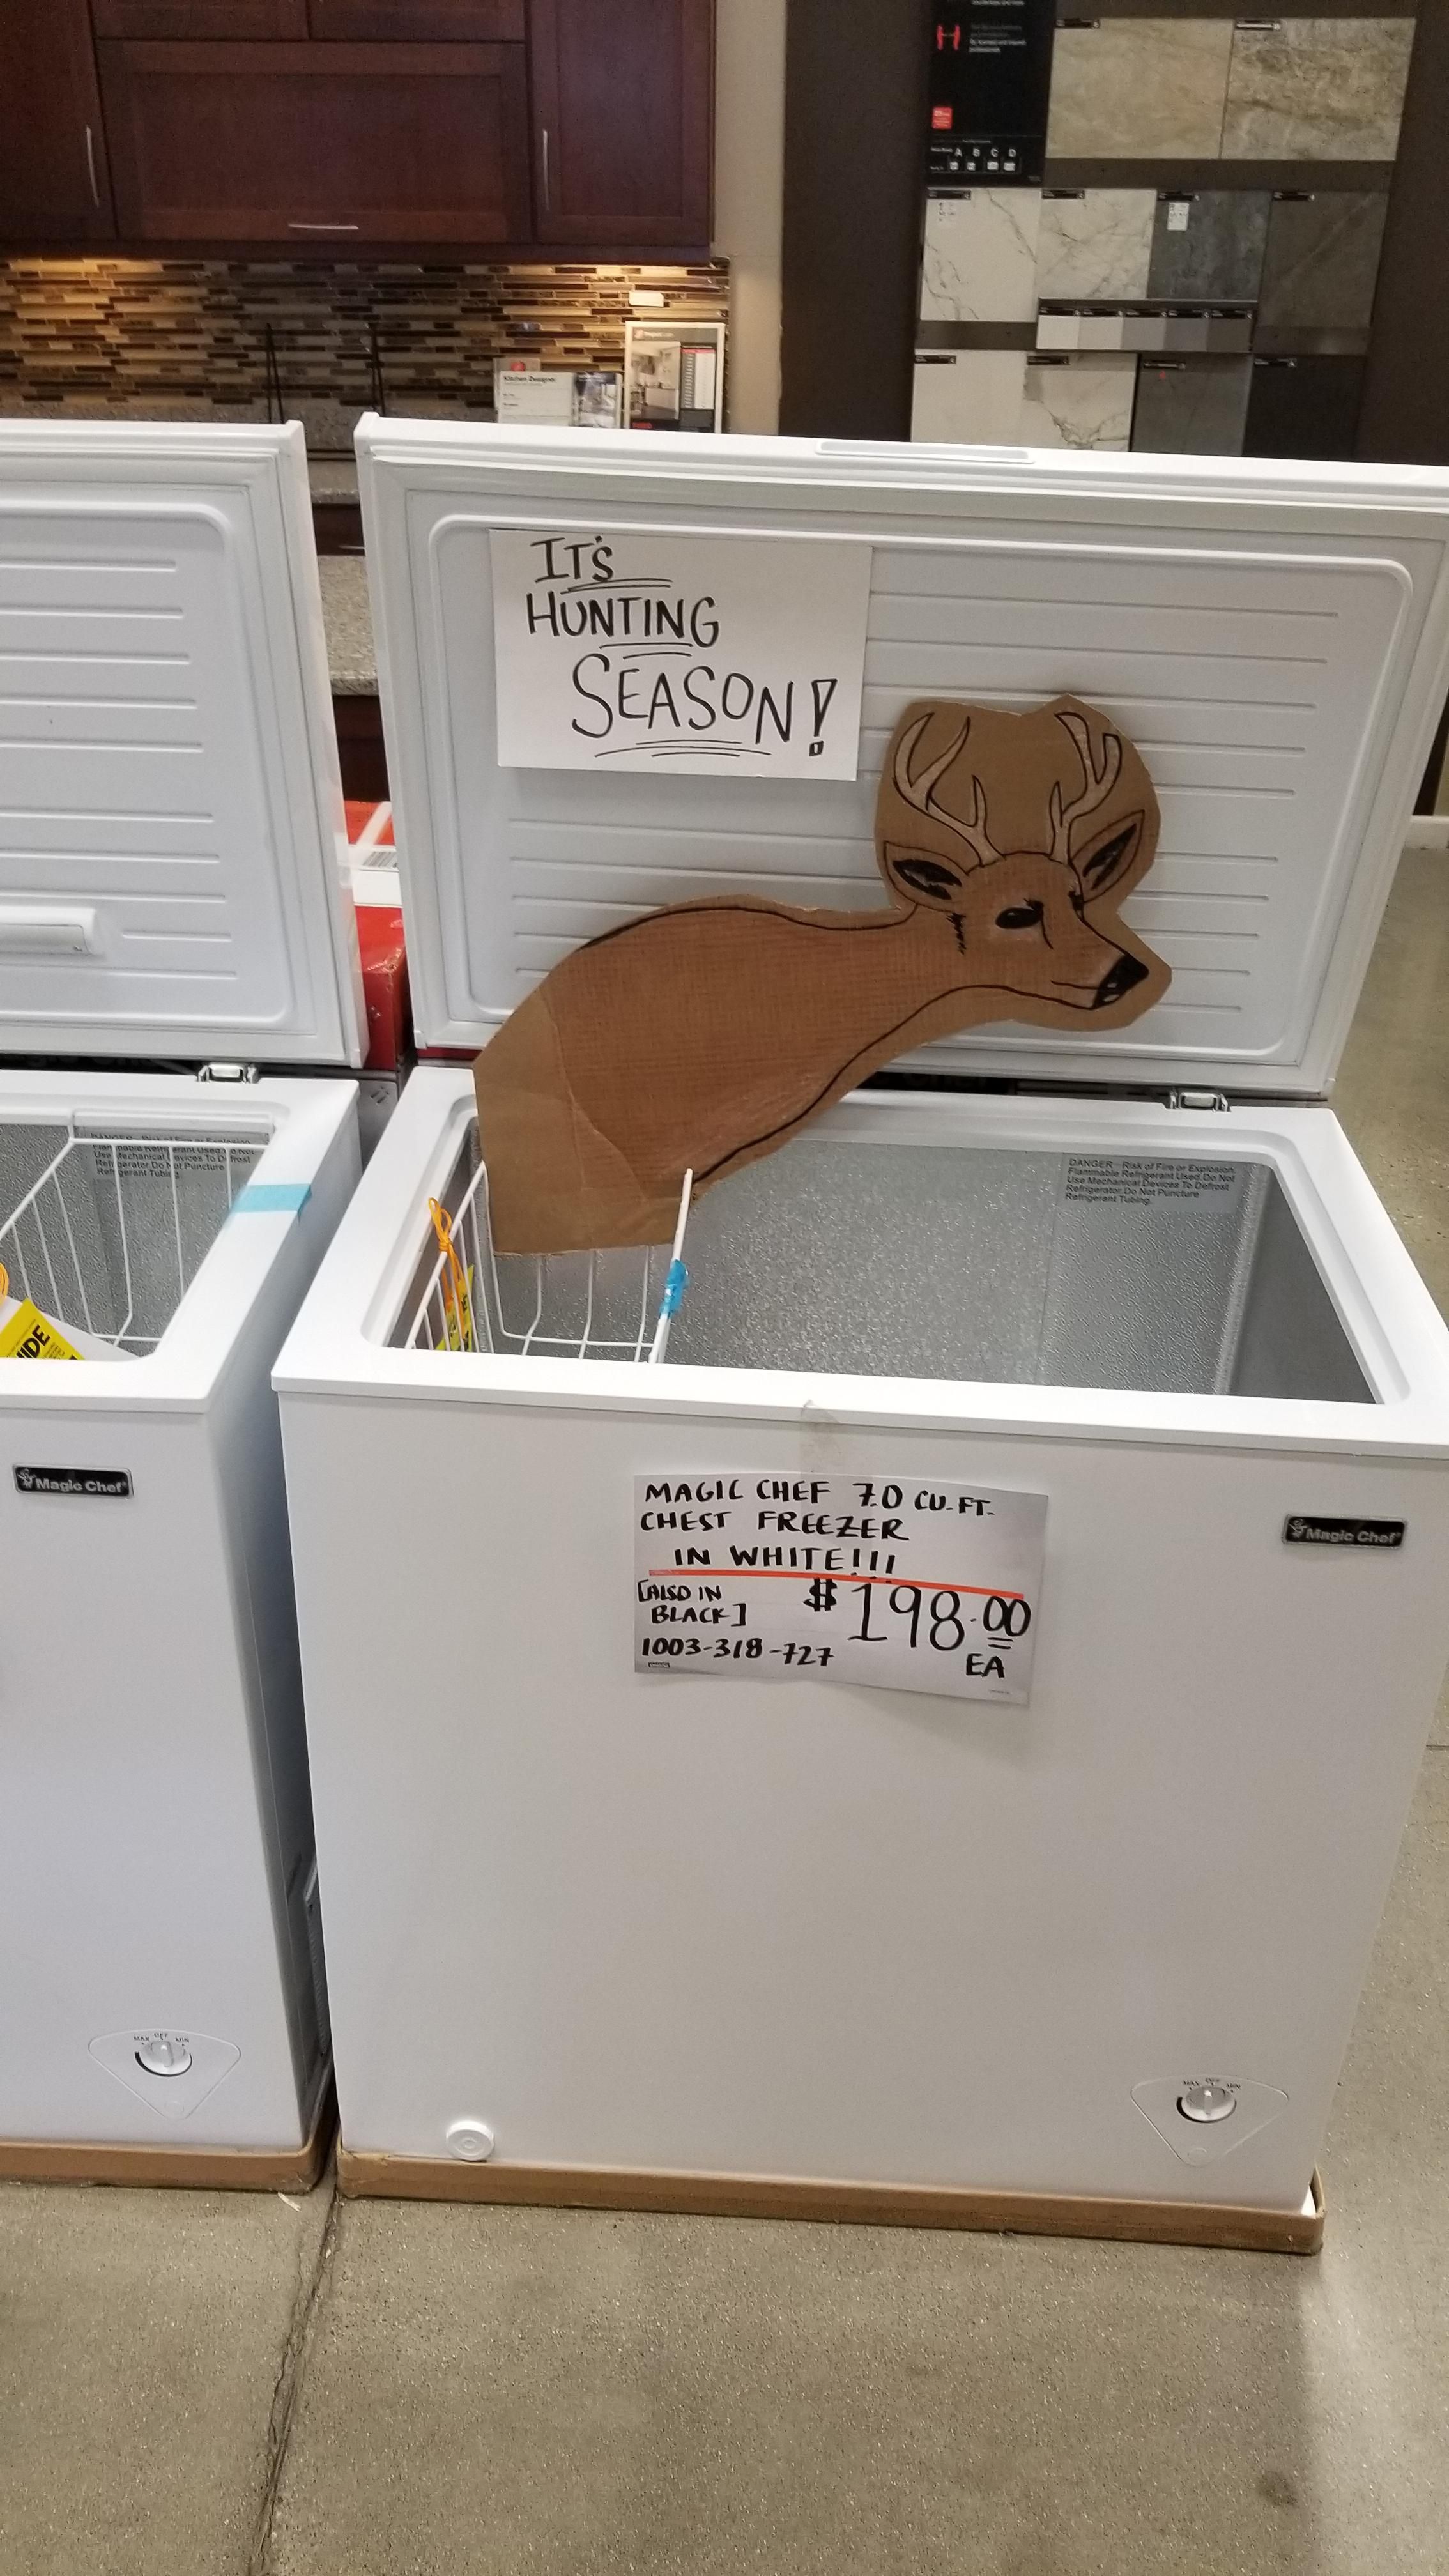 I know Home Depot is just trying to sell freezers but it really looks like this deer is taking a dump in it.